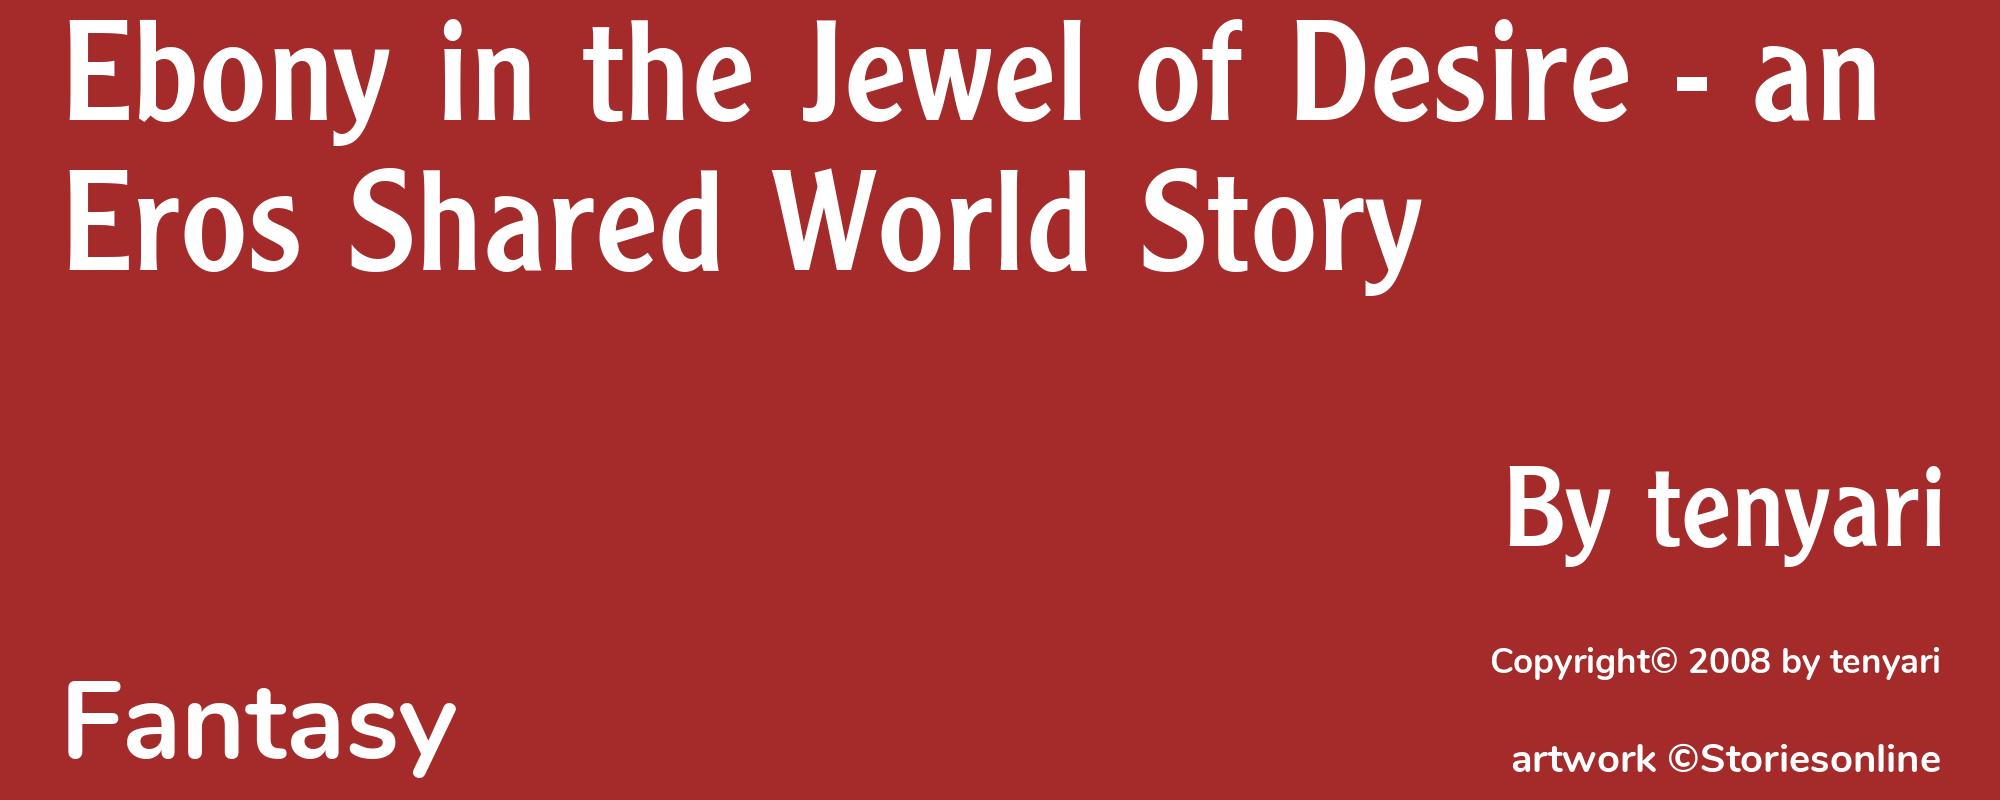 Ebony in the Jewel of Desire - an Eros Shared World Story - Cover